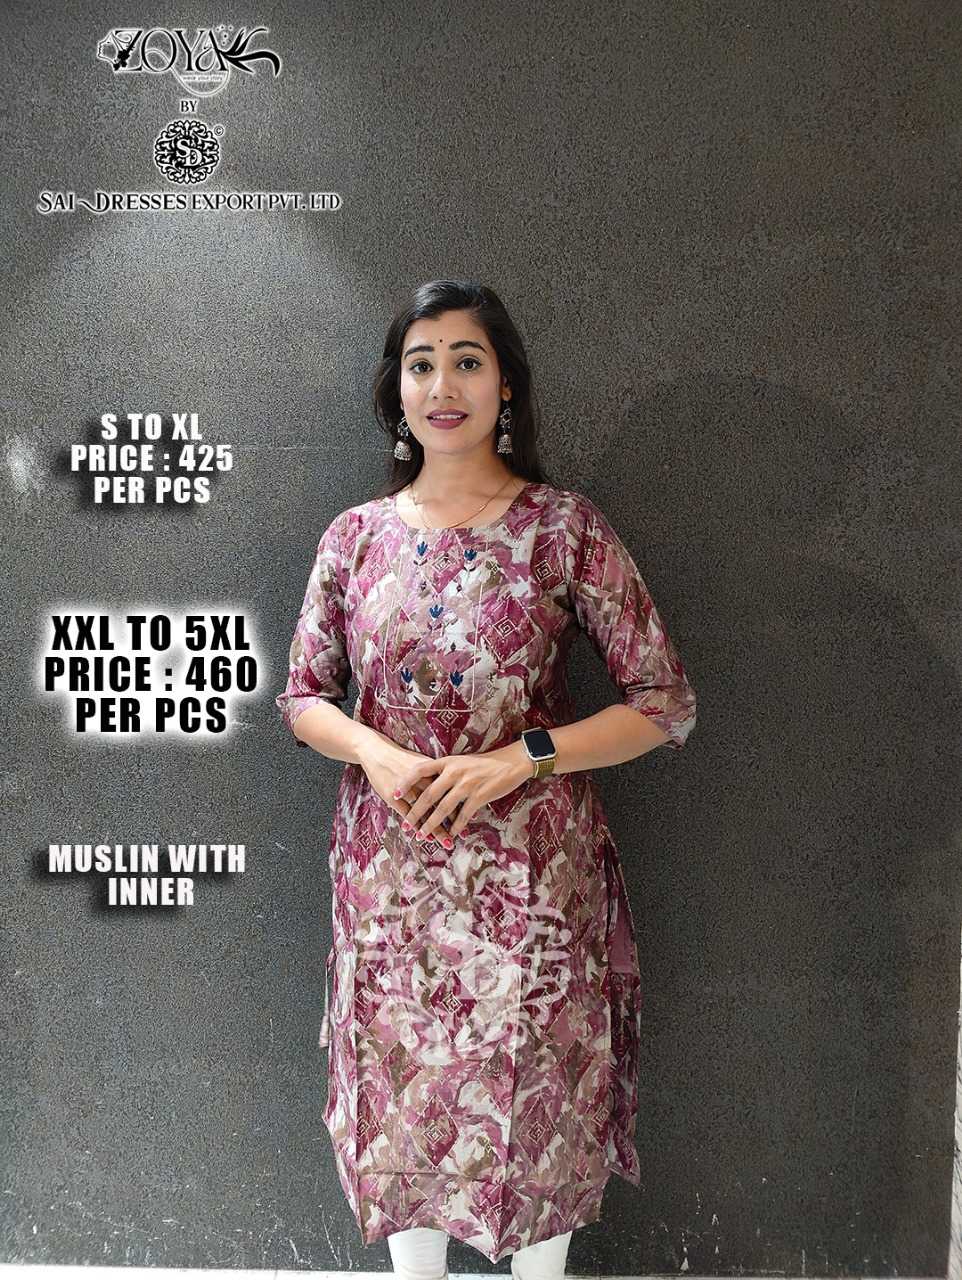 SAI DRESSES PRESENT D.NO SD82 READY TO WEAR BEAUTIFUL MUSLIN PRINTED STRAIGHT KURTI COMBO COLLECTION IN WHOLESALE RATE IN SURAT